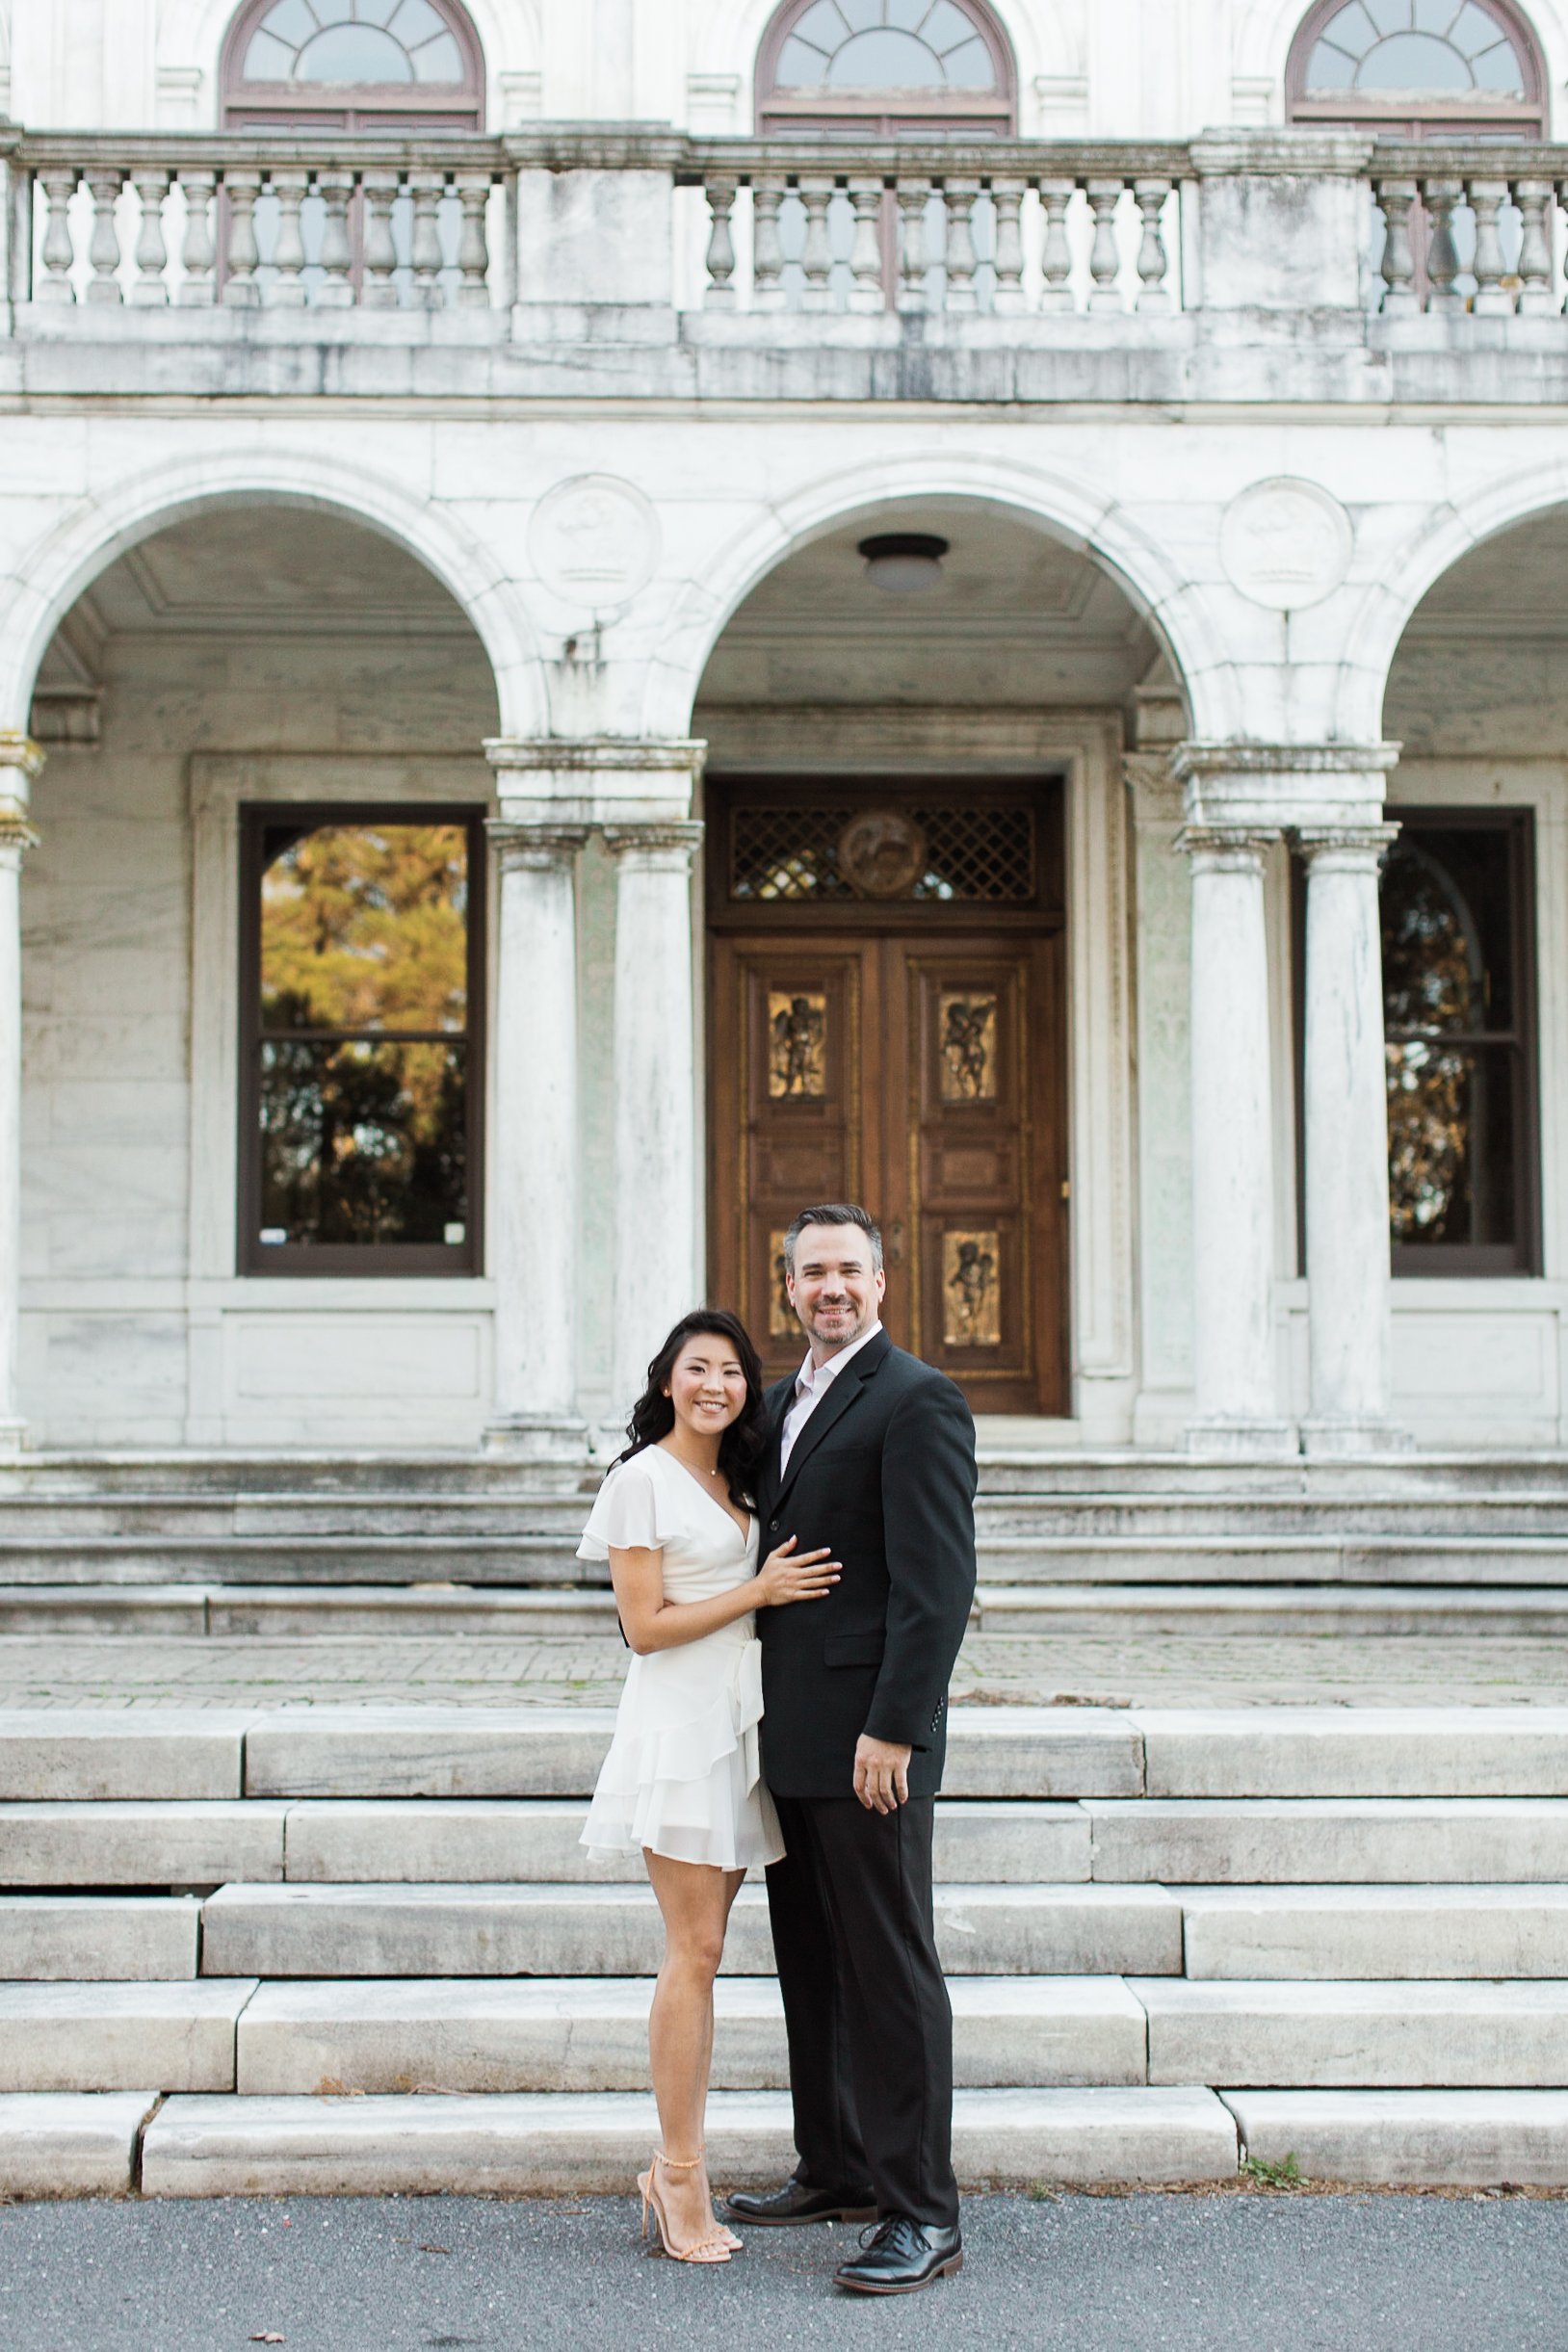 Spring engagement session on the steps of Swannanoa Palace in Afton, VA